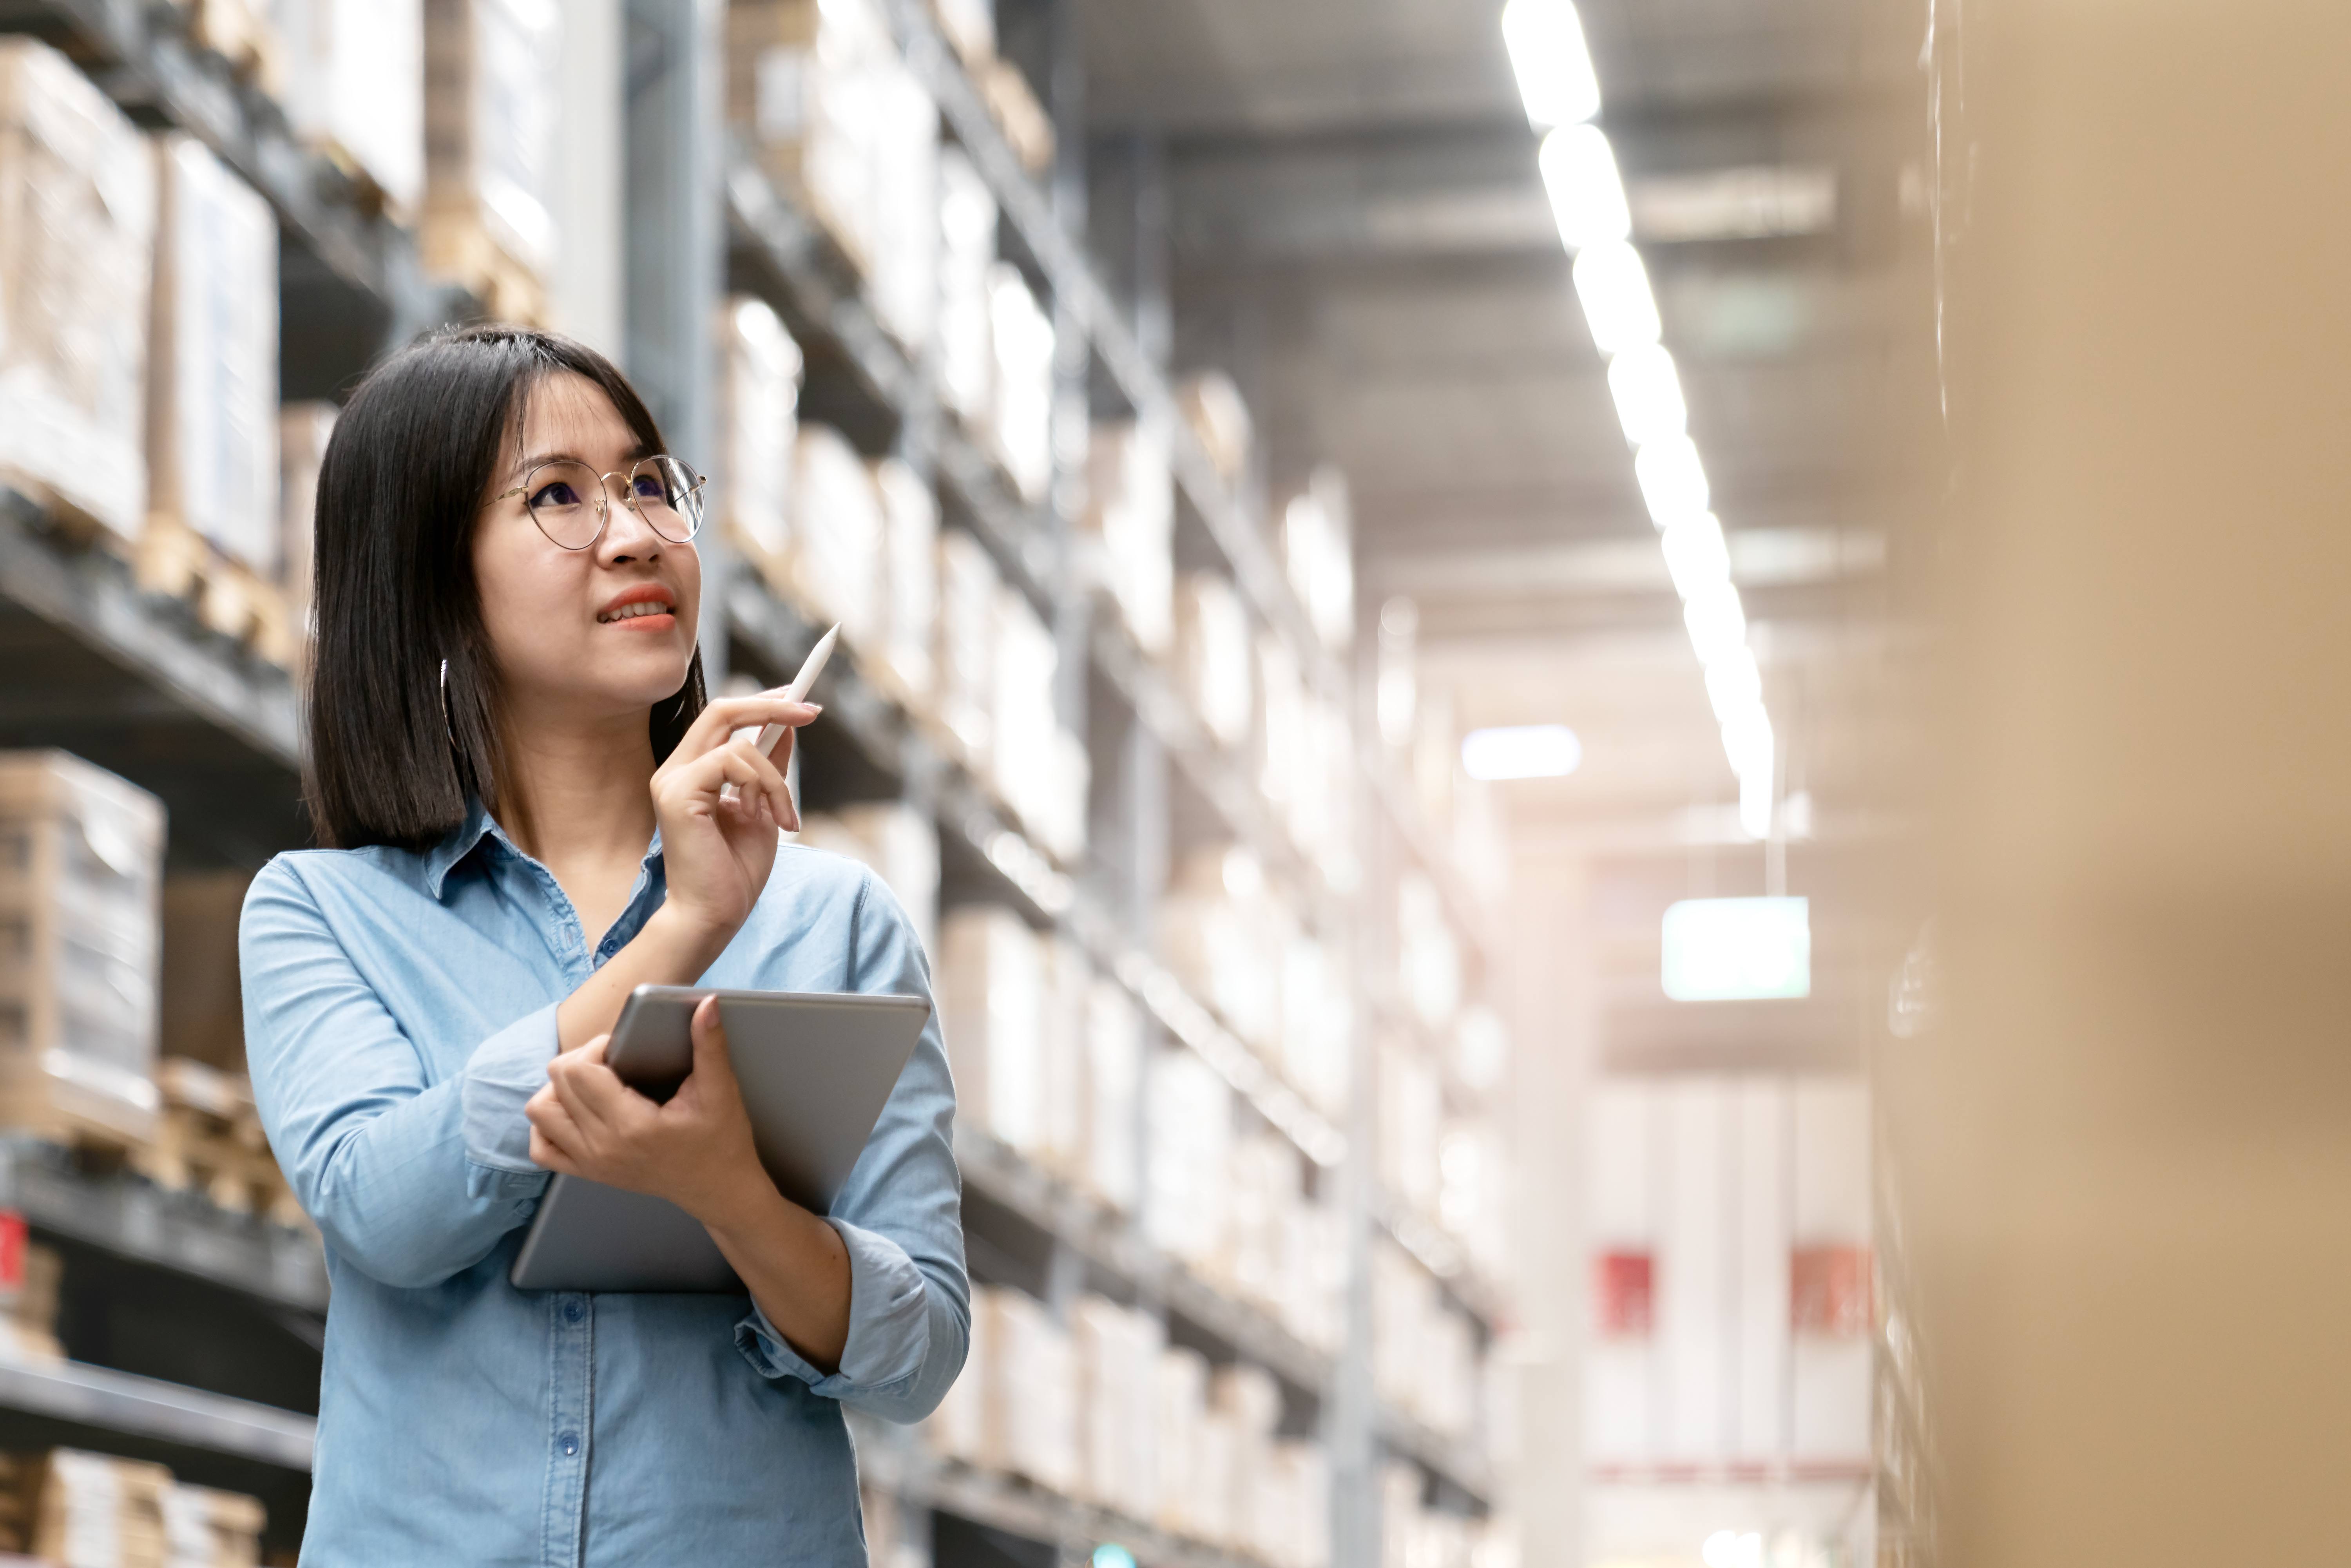 How to Become a Supply Chain Manager